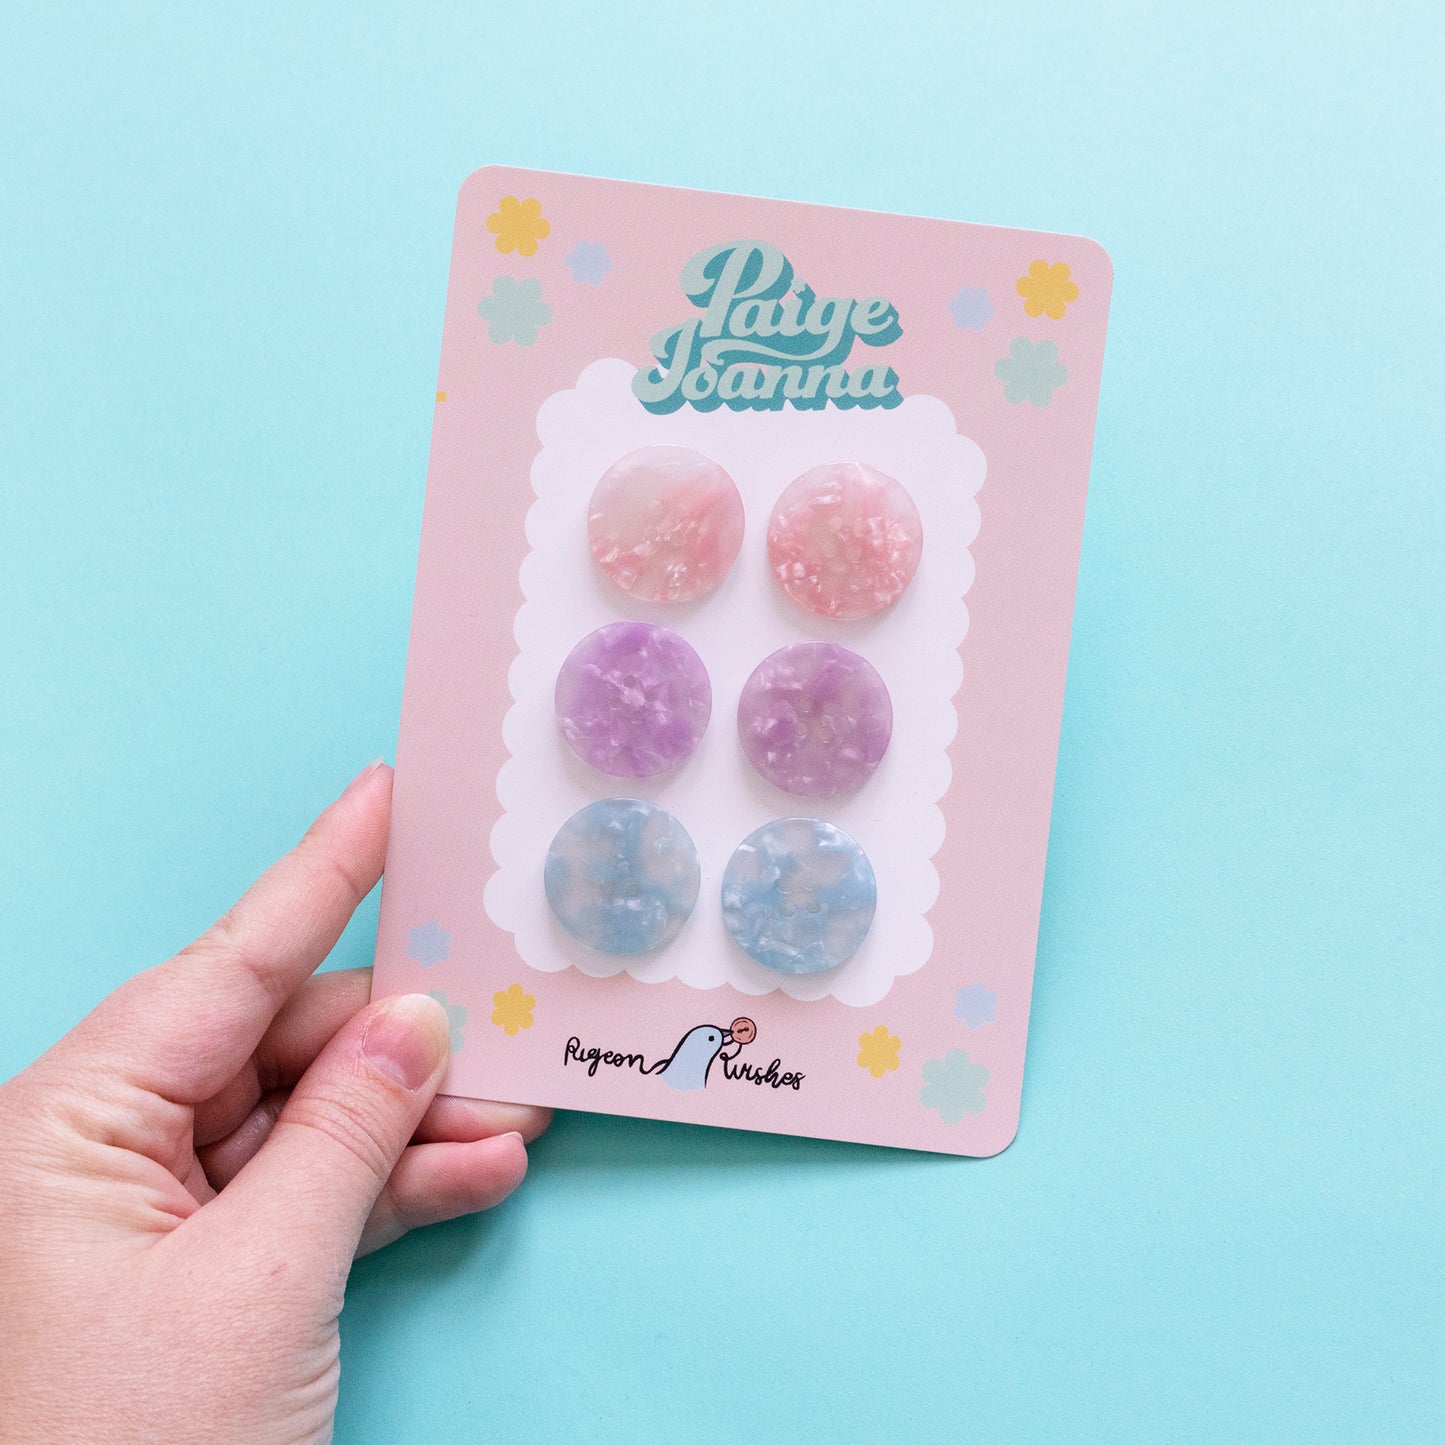 X6 Original Paige Joanna X Pigeon Wishes Pastel Buttons | Pic 'n' Mix Pack